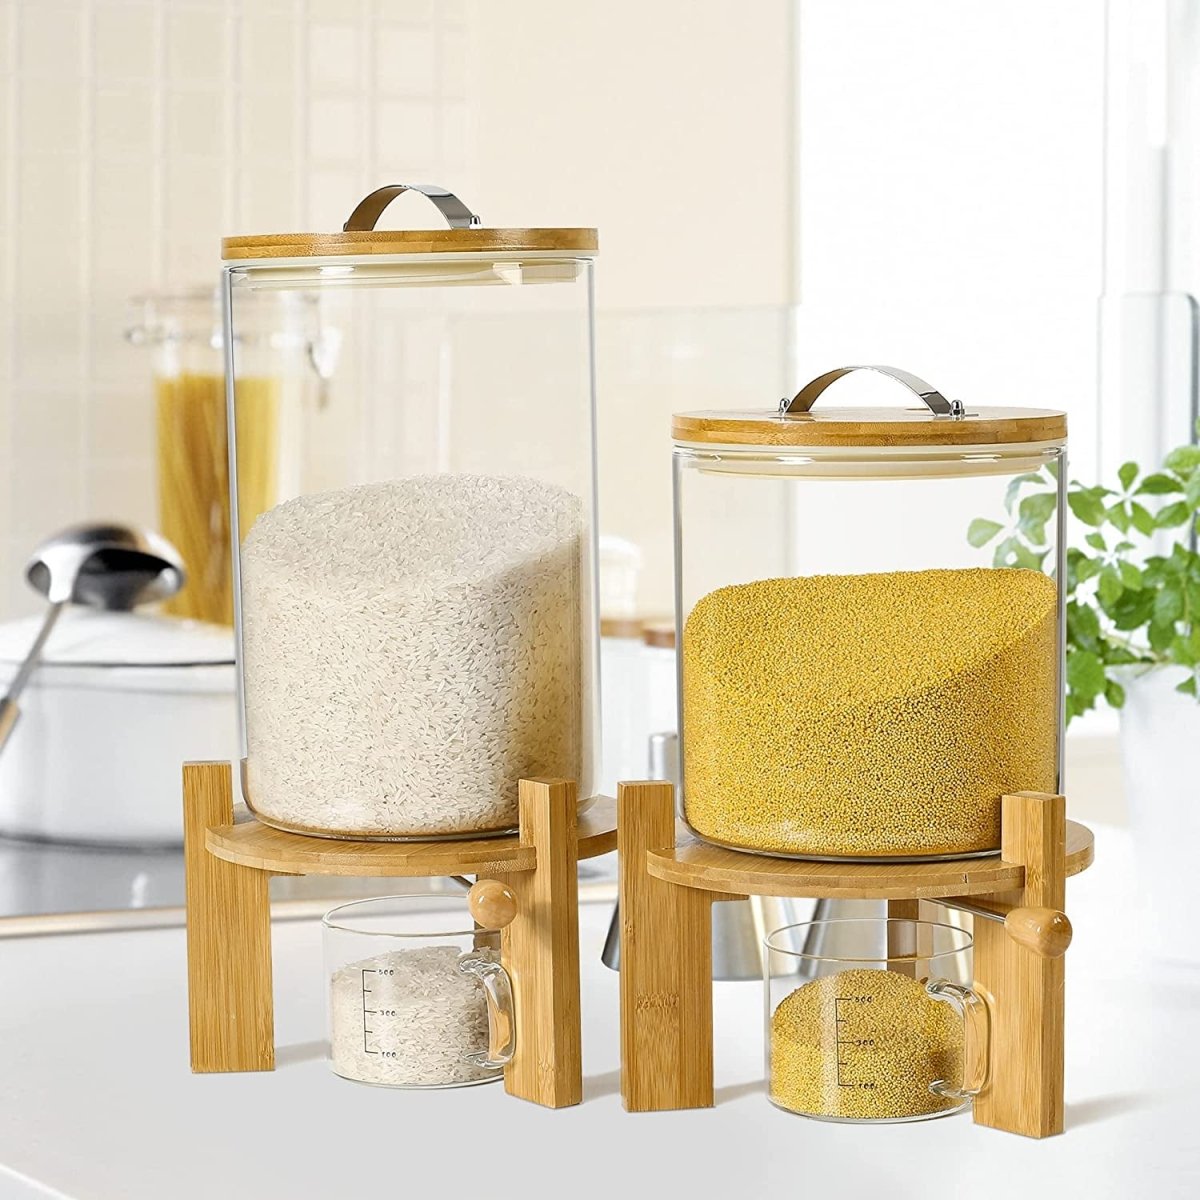 Rice Dispenser, Rice Storage Container：Flour and Cereal Container with Airtight Lid and Wooden Stand, Glass Food Storge Container for Kitchen Organization and Pantry Store (5L) - Shiny Nails